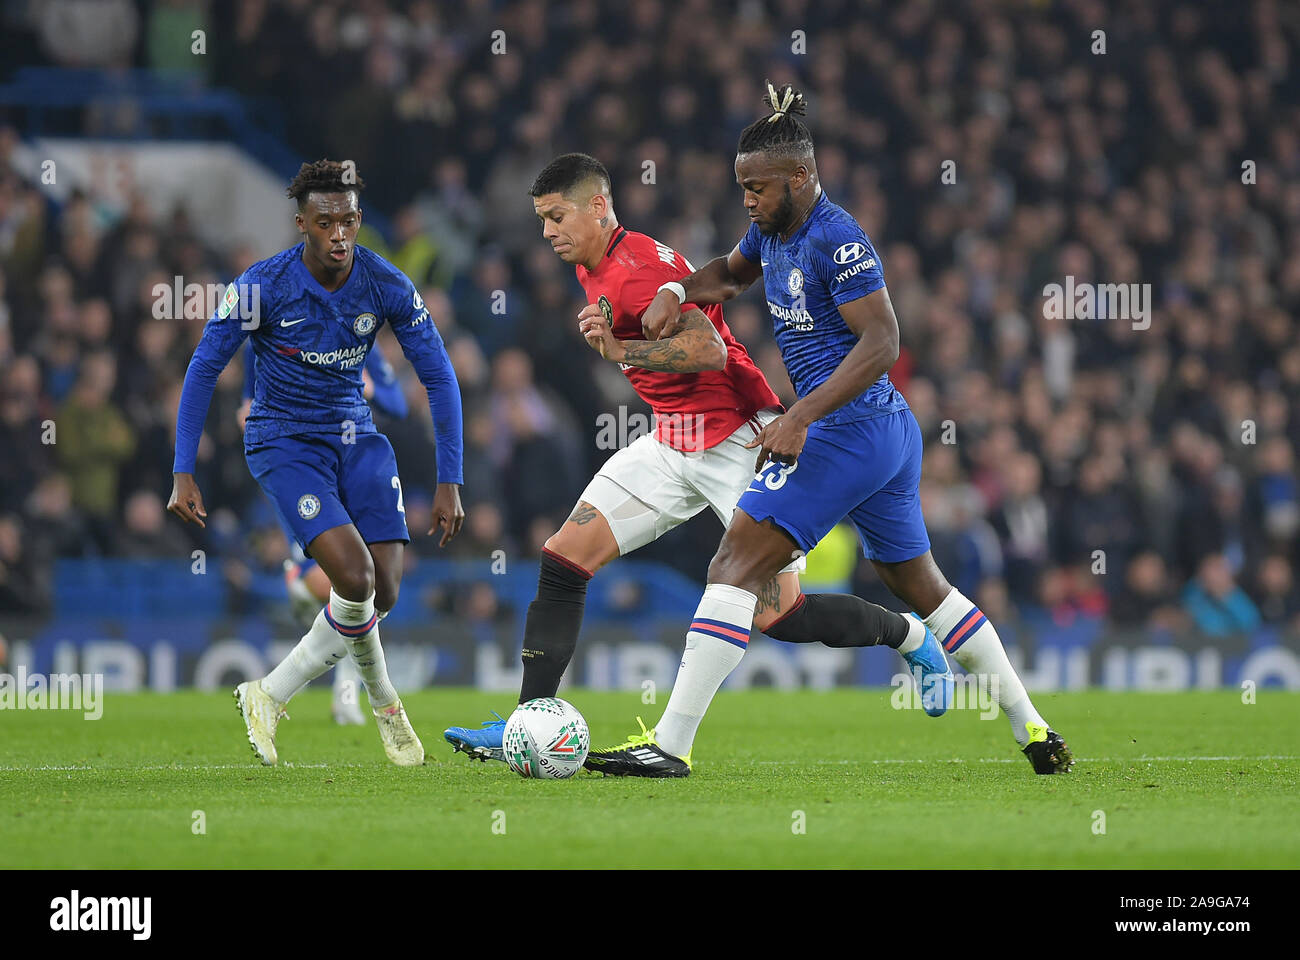 Michy Batshuayi clashes with Marcos Rojo of Manchester Utd during the Chelsea vs Manchester United EFL Carabao Cup Round of 16 tie at Stamford Bridge Stock Photo